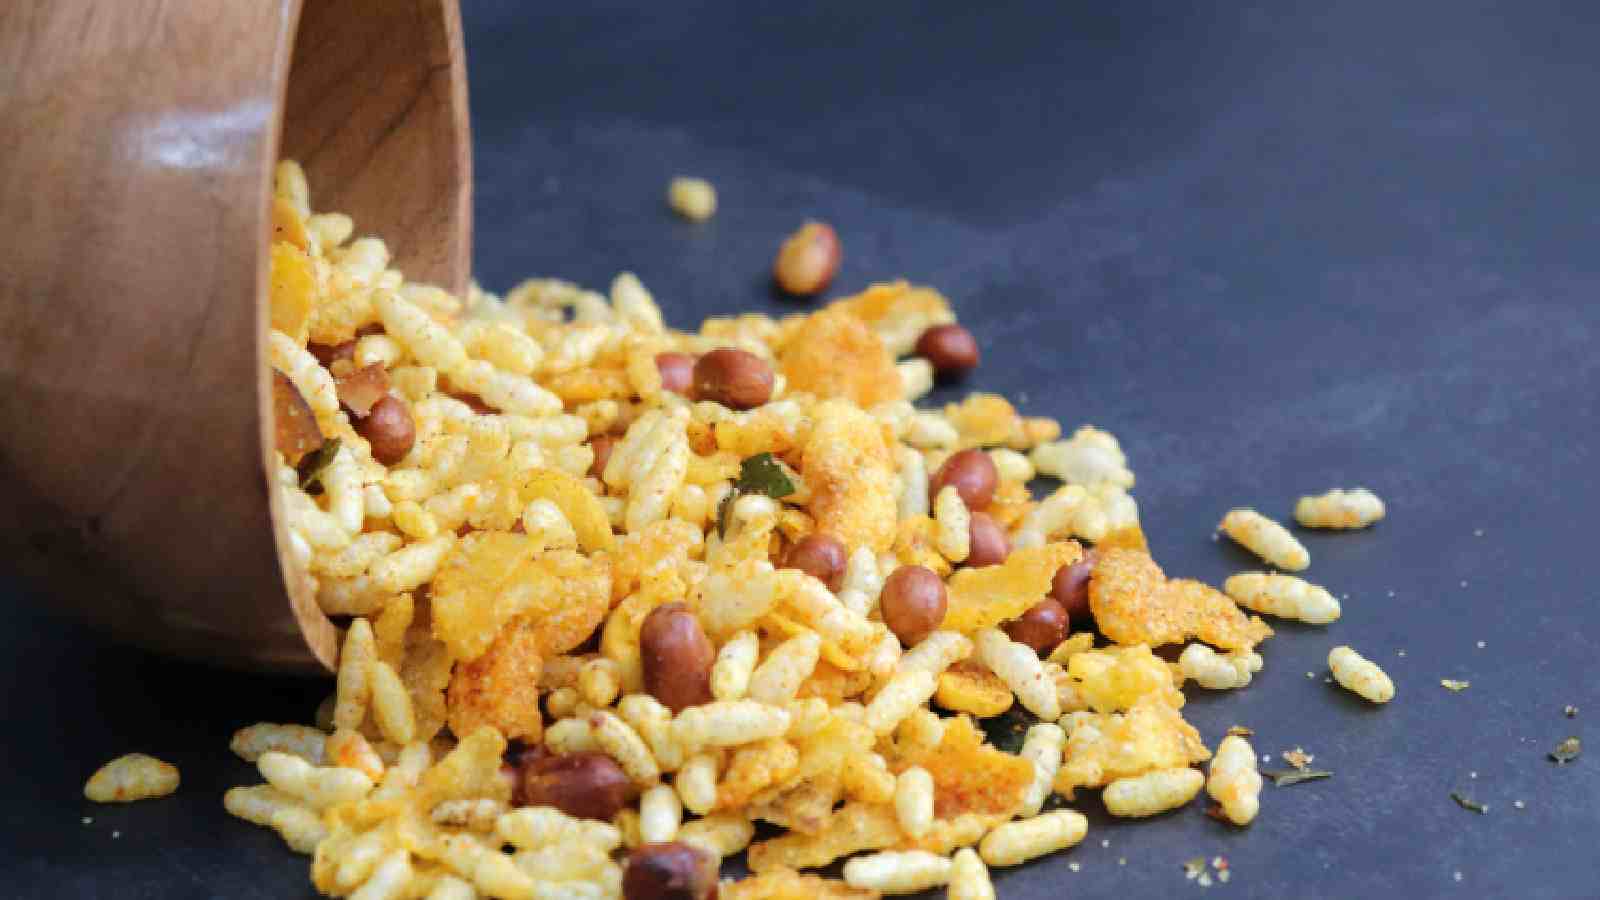 Weight Loss Snacks: Try murmura, also known as puffed rice, for these 7 benefits